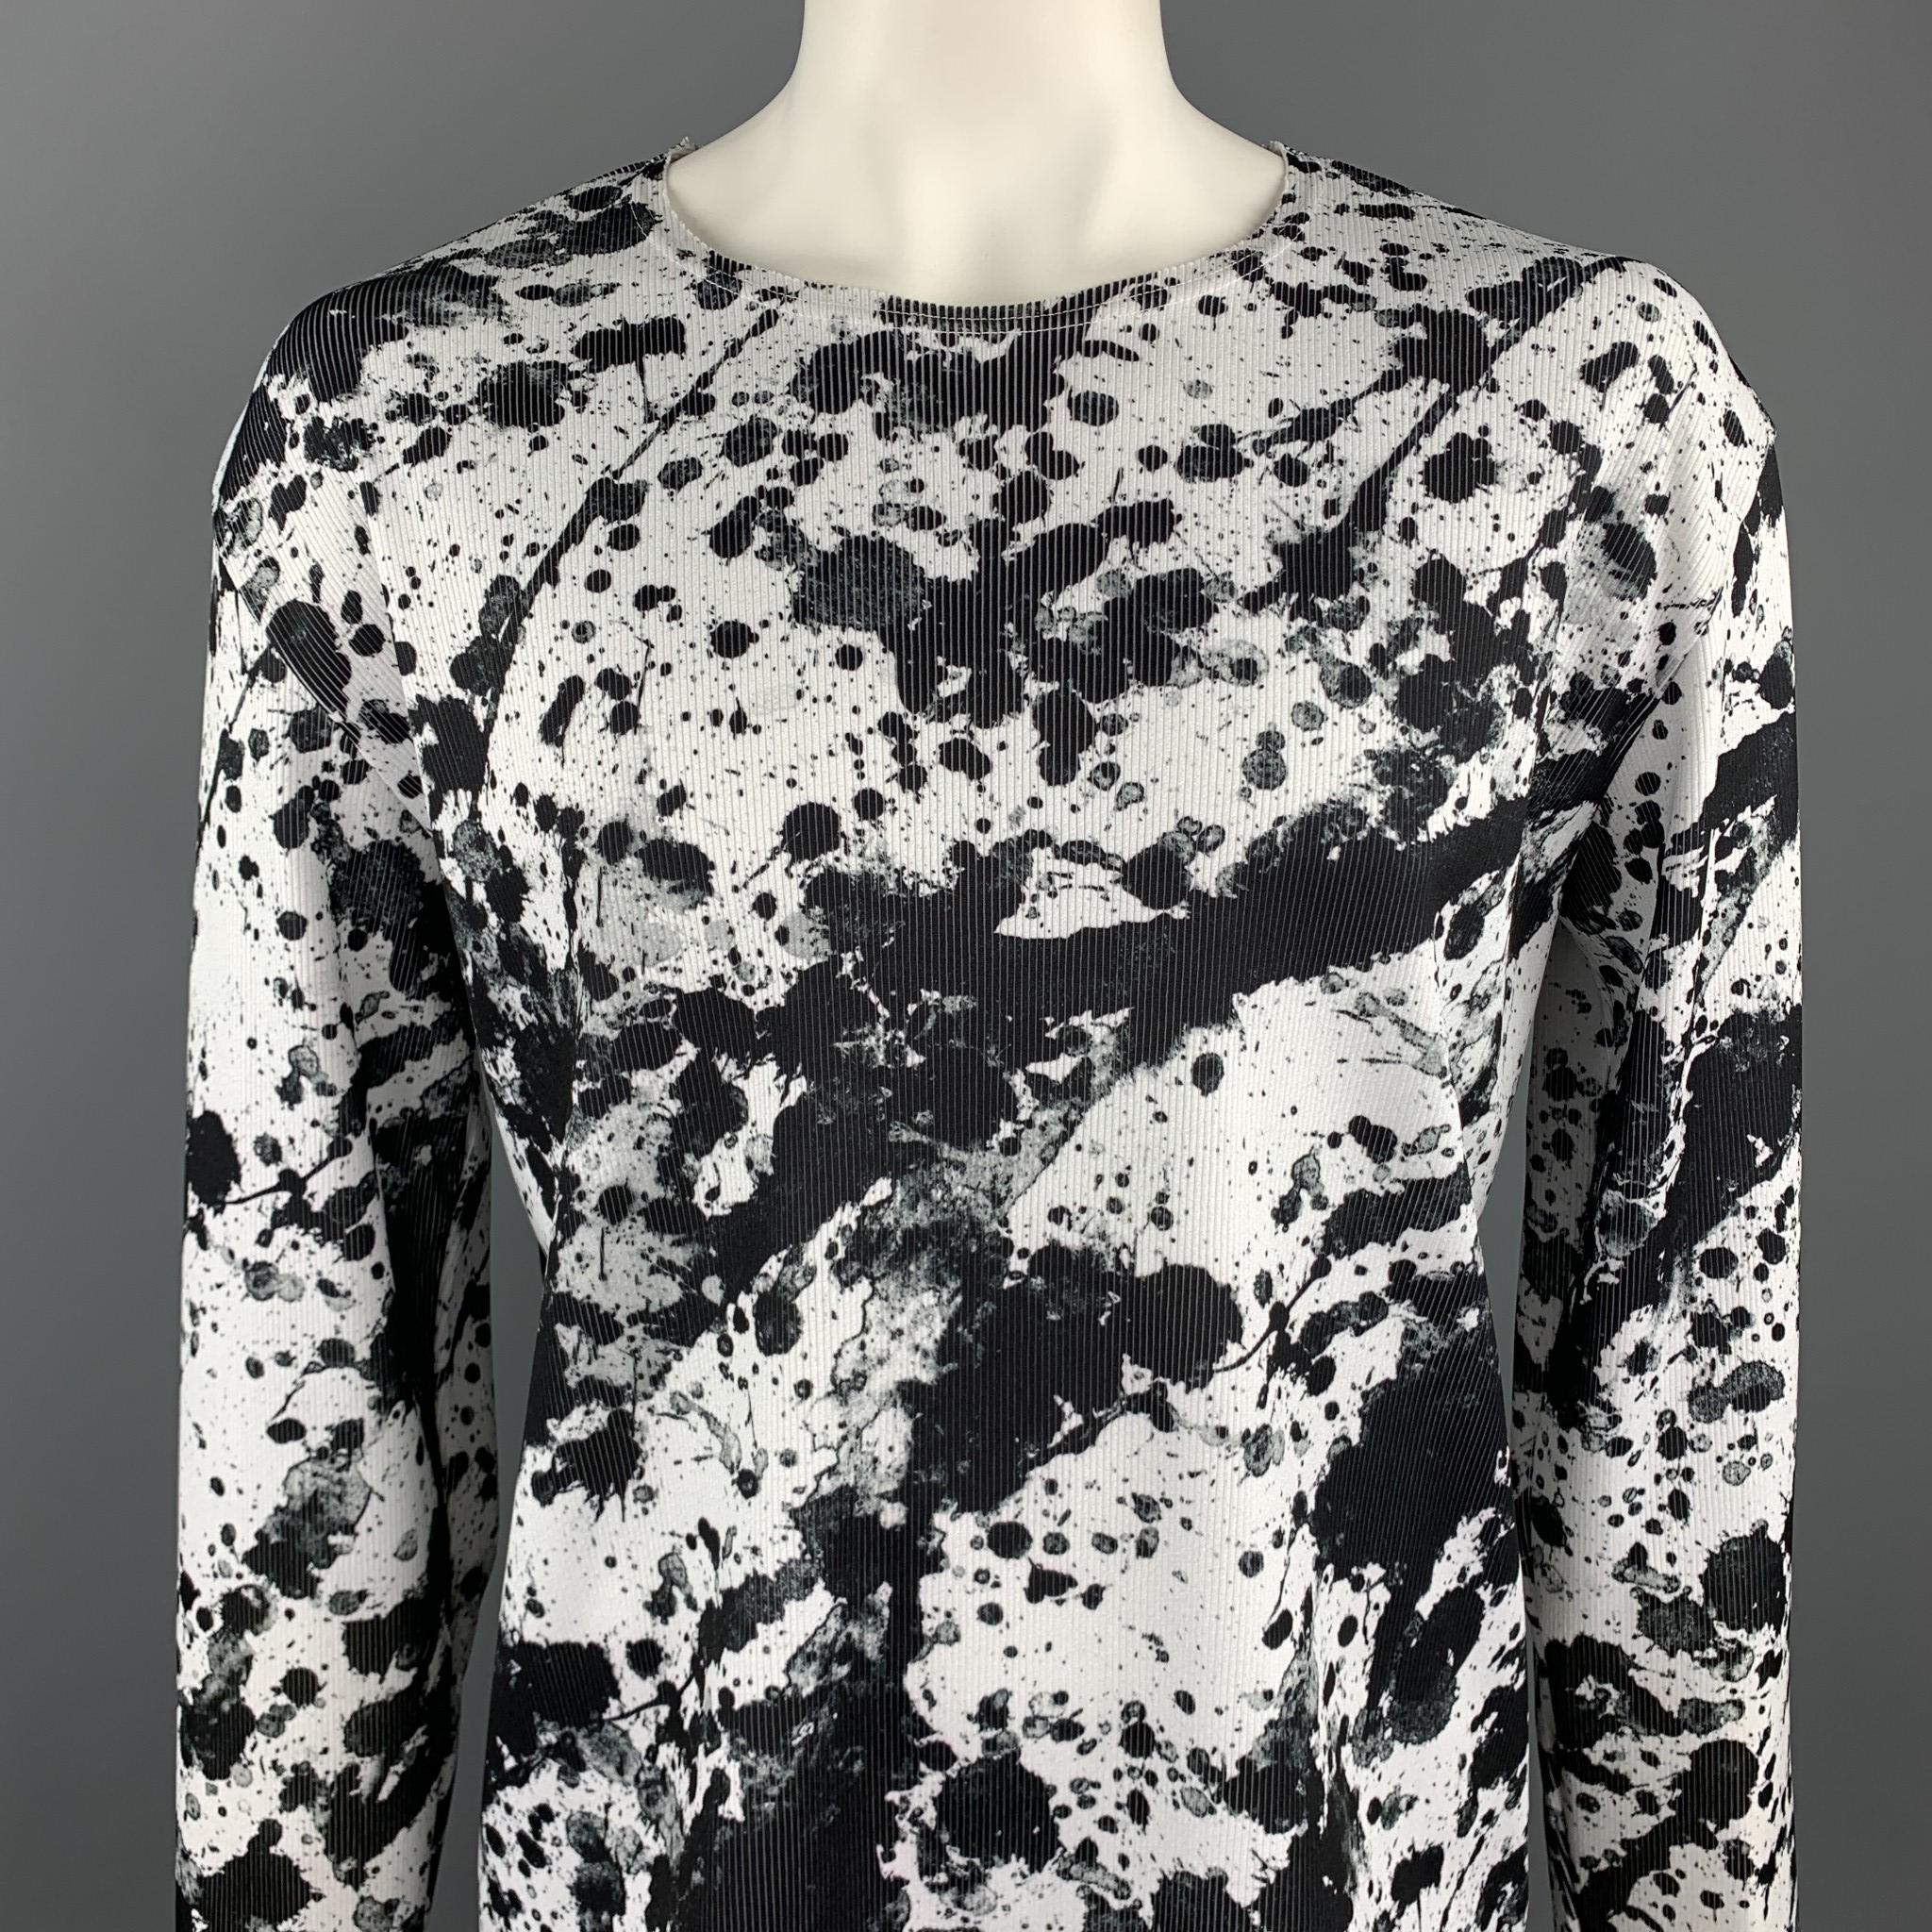 COMME des GARCONS BLACK pullover comes in a black & white ribbed polyester with a splattered print all over featuring round neck. Made in Japan. 

New With Tags. 
Marked: XXL / AD2018

Measurements:

Shoulder: 22.5 in. 
Chest: 47 in. 
Sleeve: 27 in.